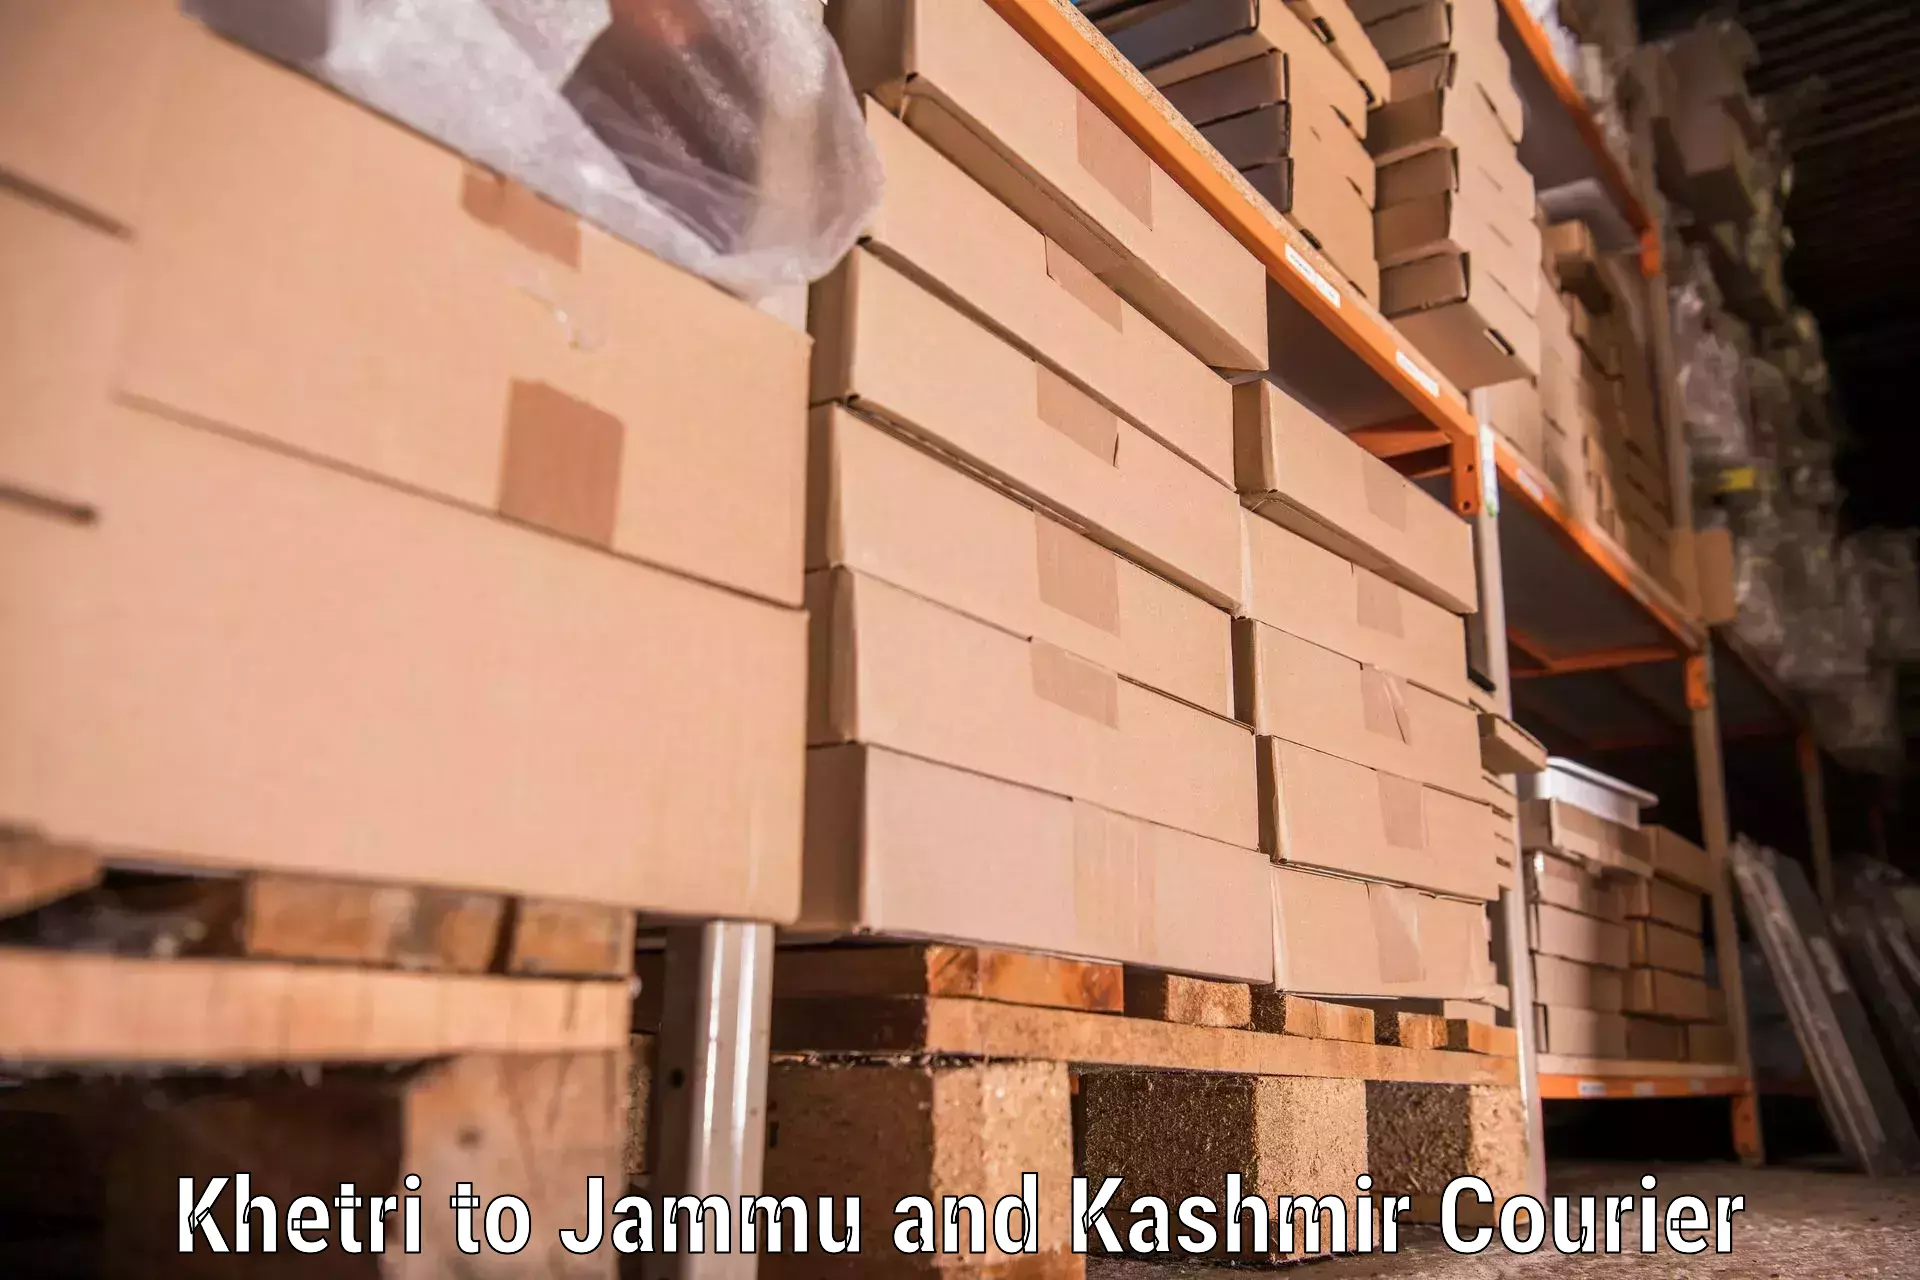 Trusted furniture transport in Khetri to Pulwama